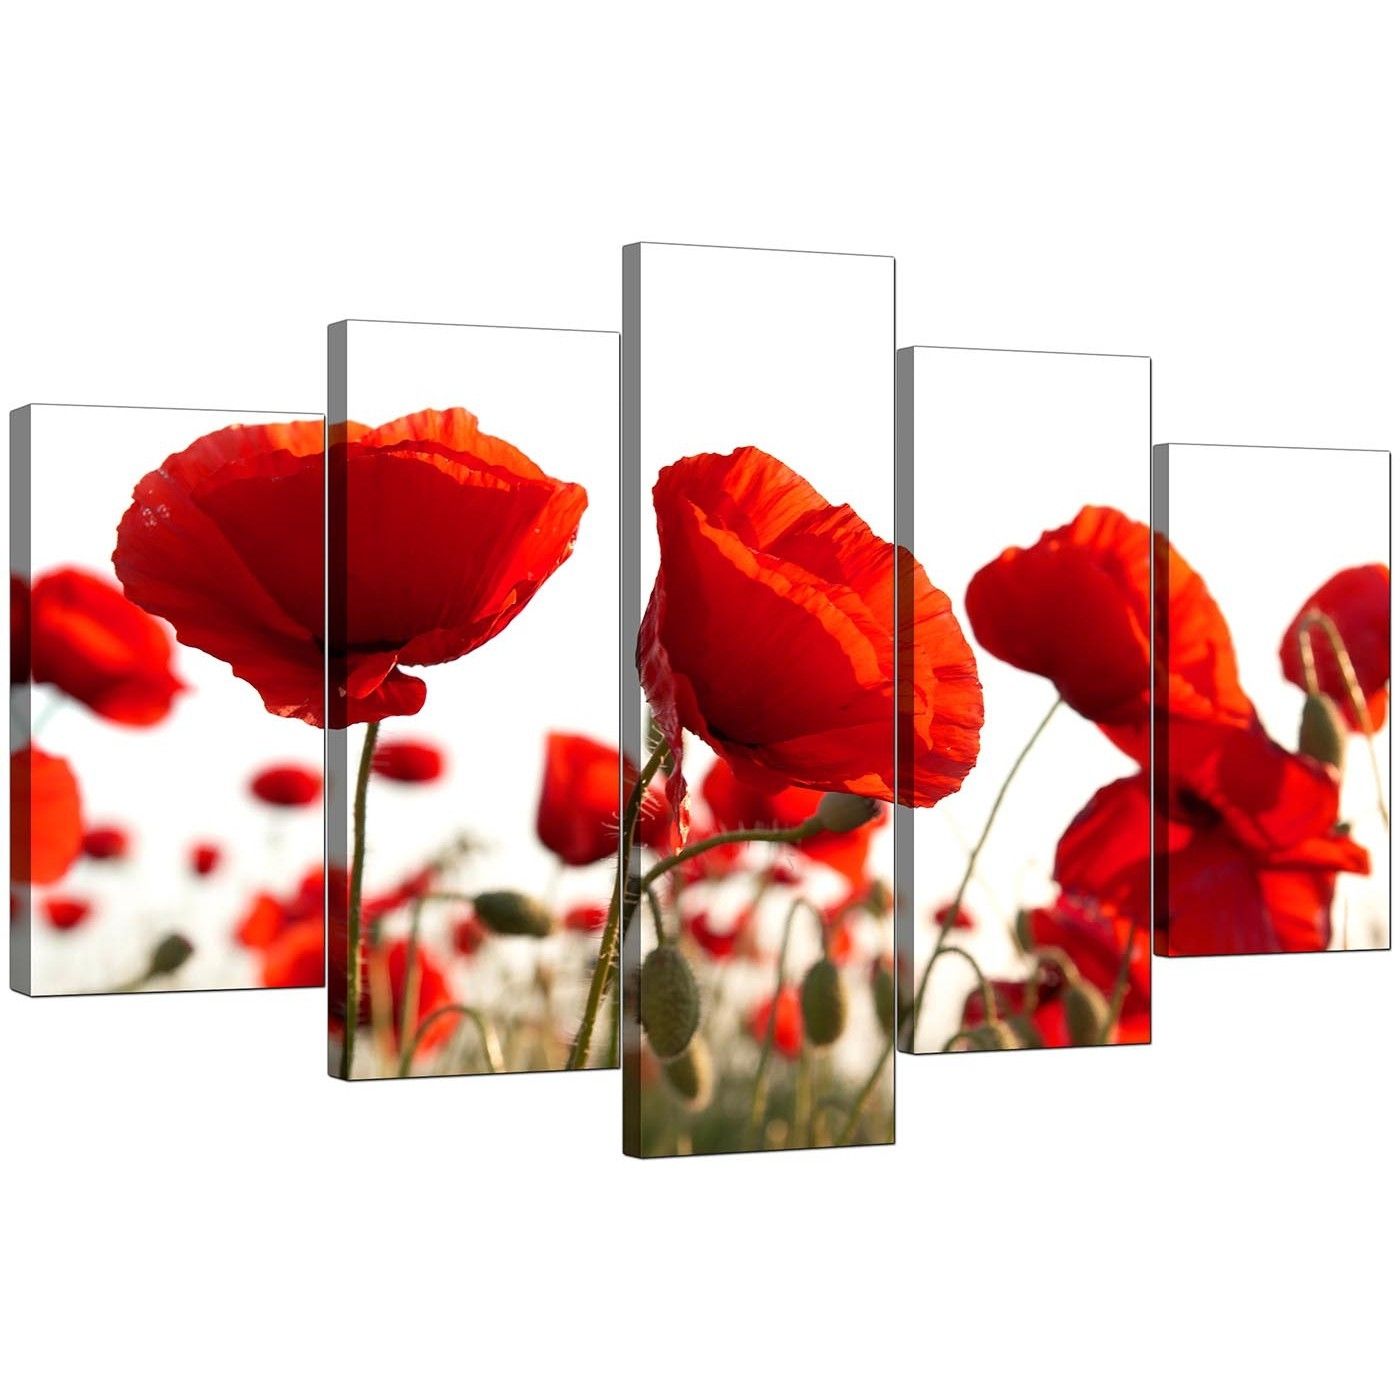 Extra Large Poppies Canvas Prints Uk 5 Part In Red In Most Up To Date Poppies Canvas Wall Art (View 1 of 15)